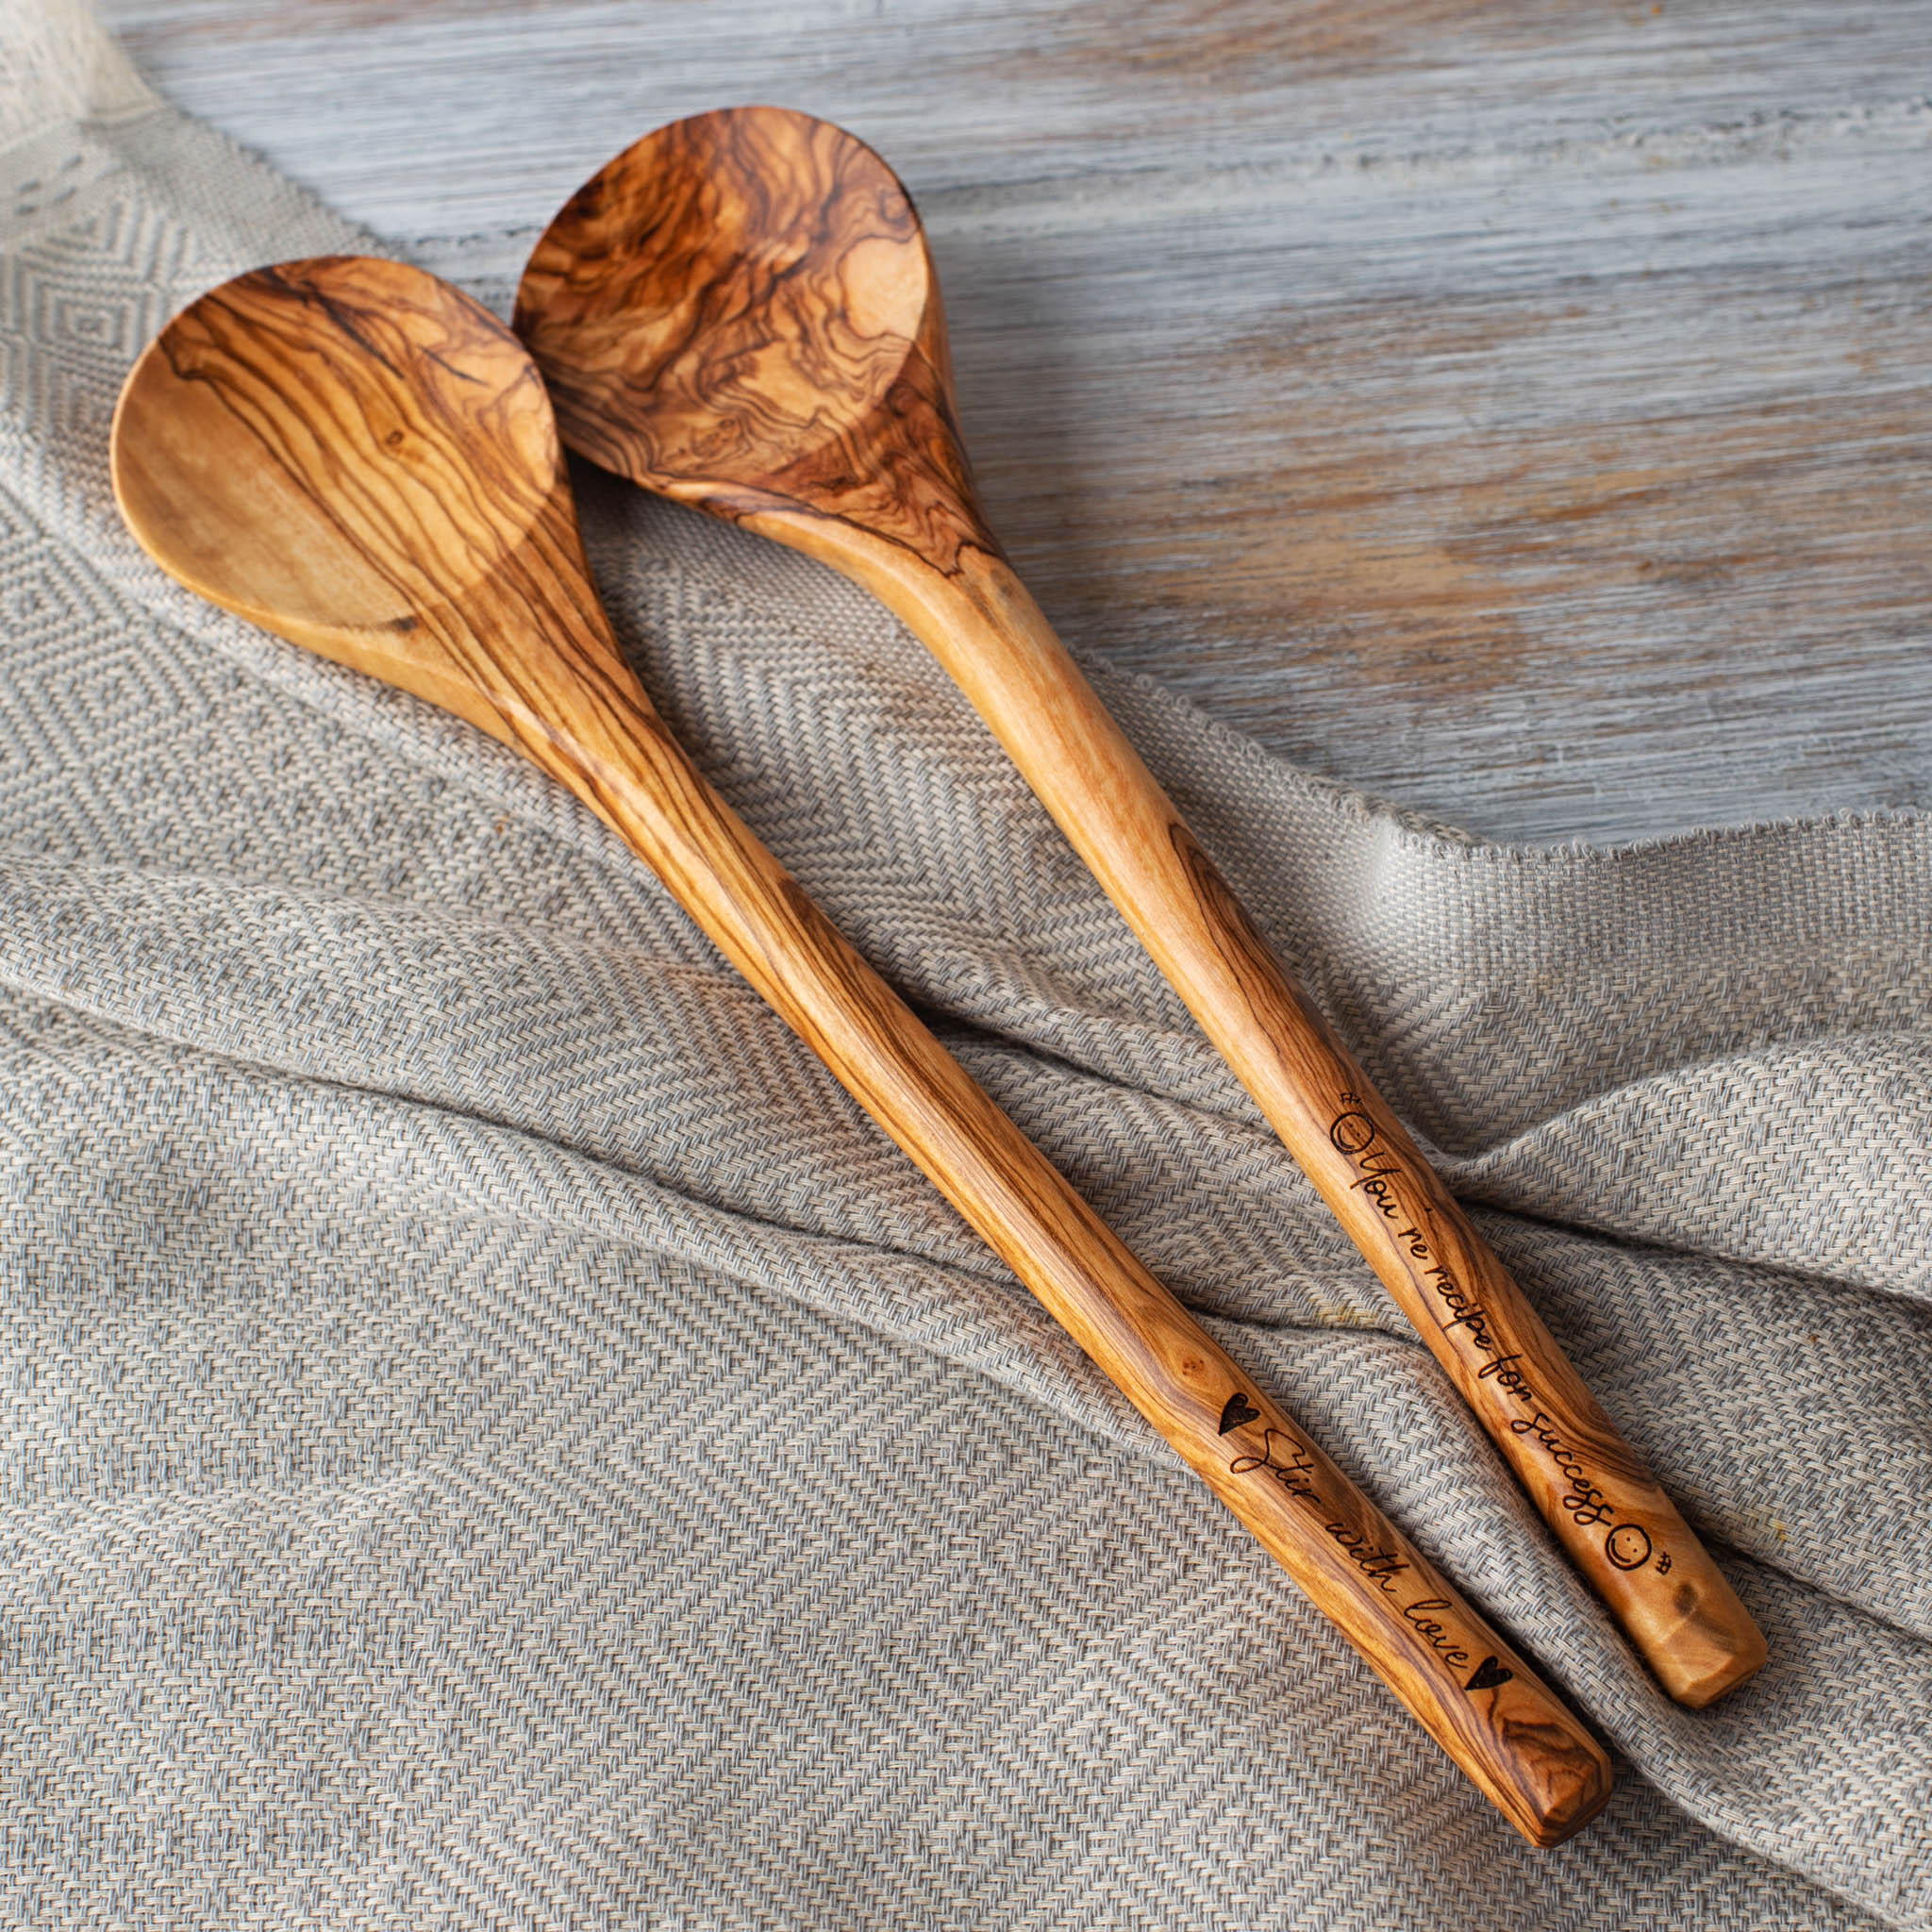 https://forest-decor.com/wp-content/uploads/25.spoons_set-of-two1.jpg